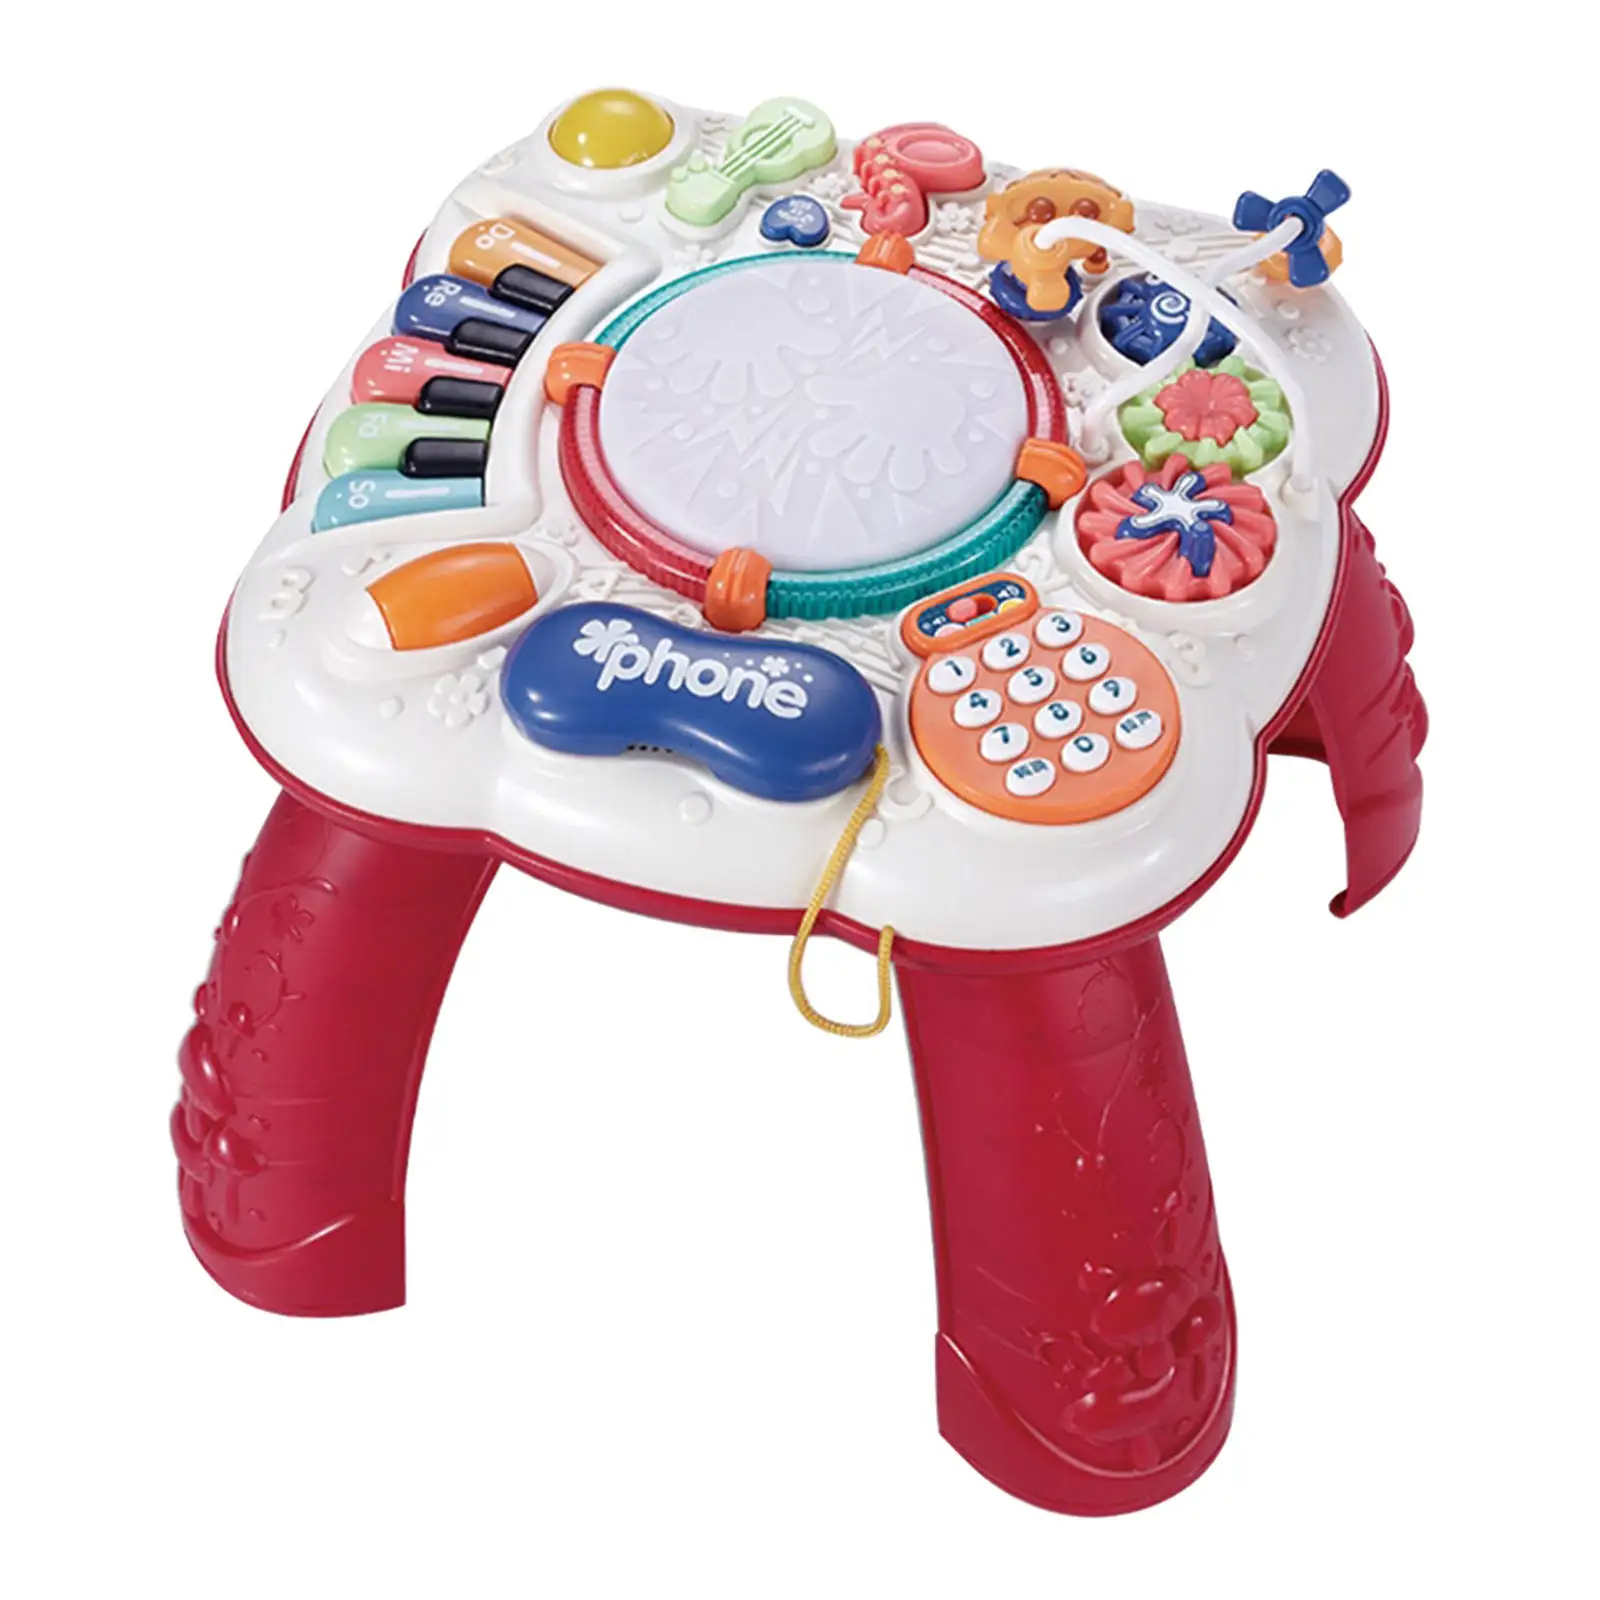 Infants Musical Instrument Learning Table Early Educational Study Activity Center Music Game For KidsBaby Toys